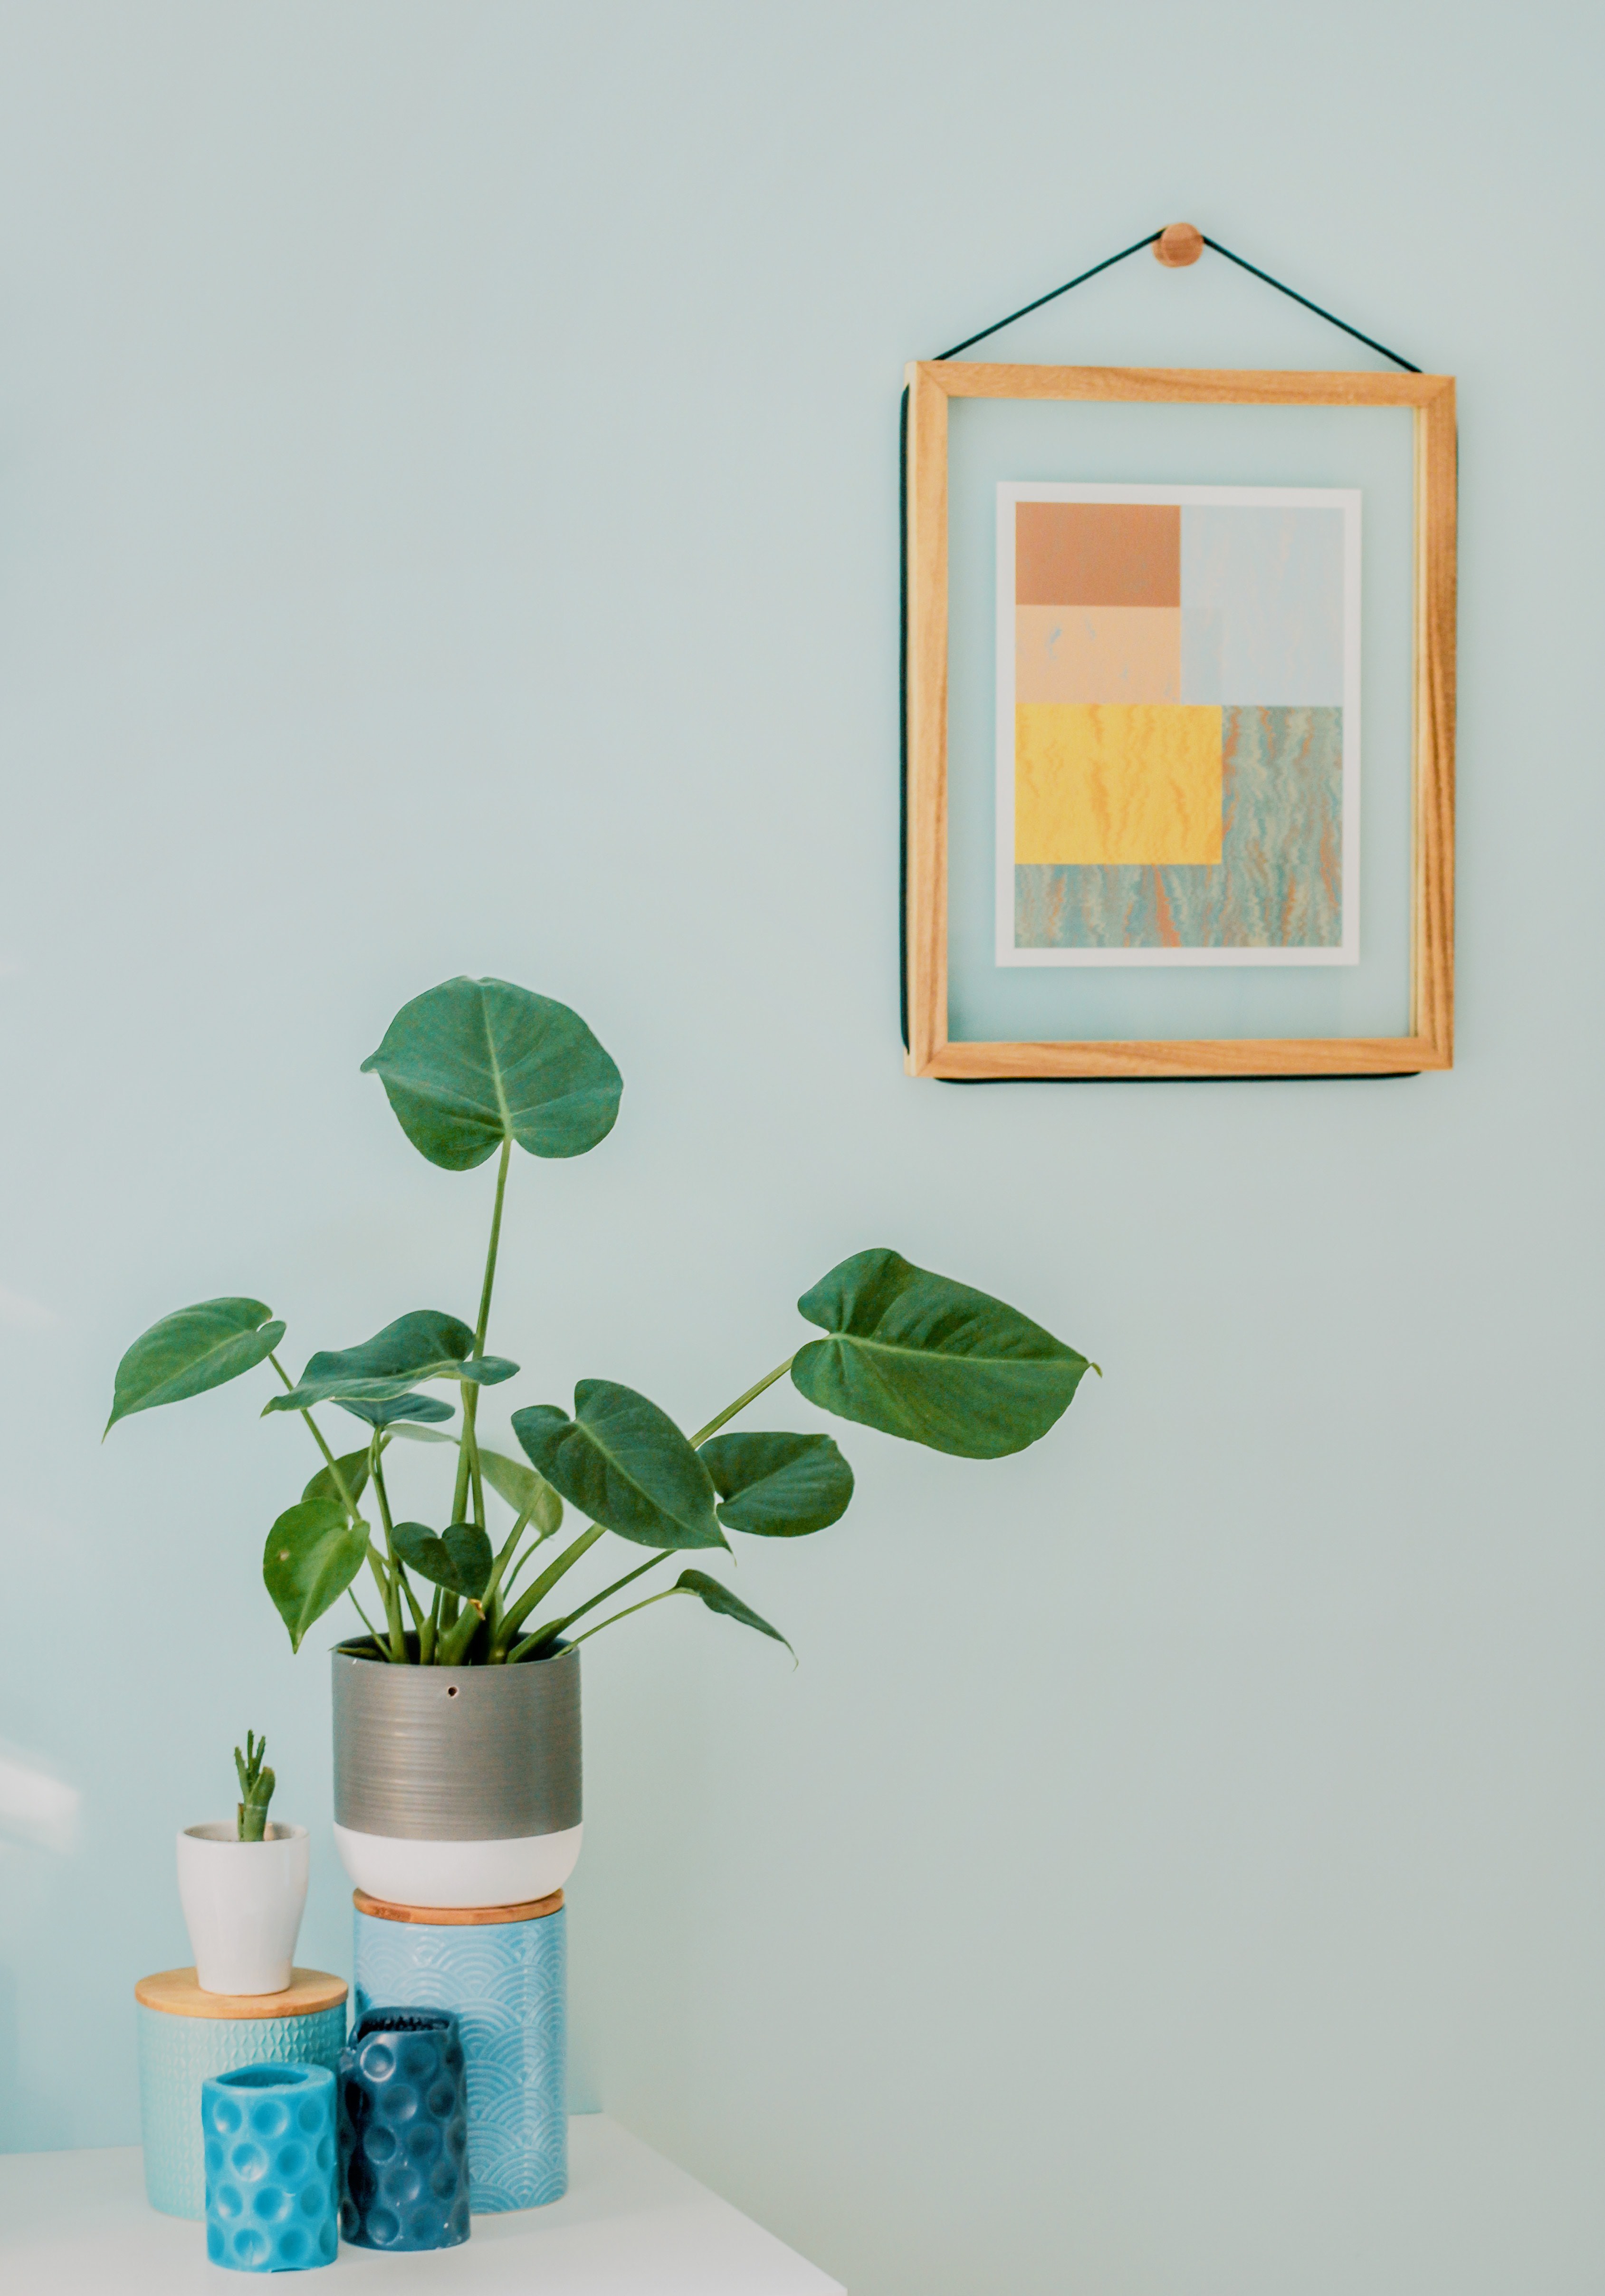 The importance of plants in the blanks for interior design